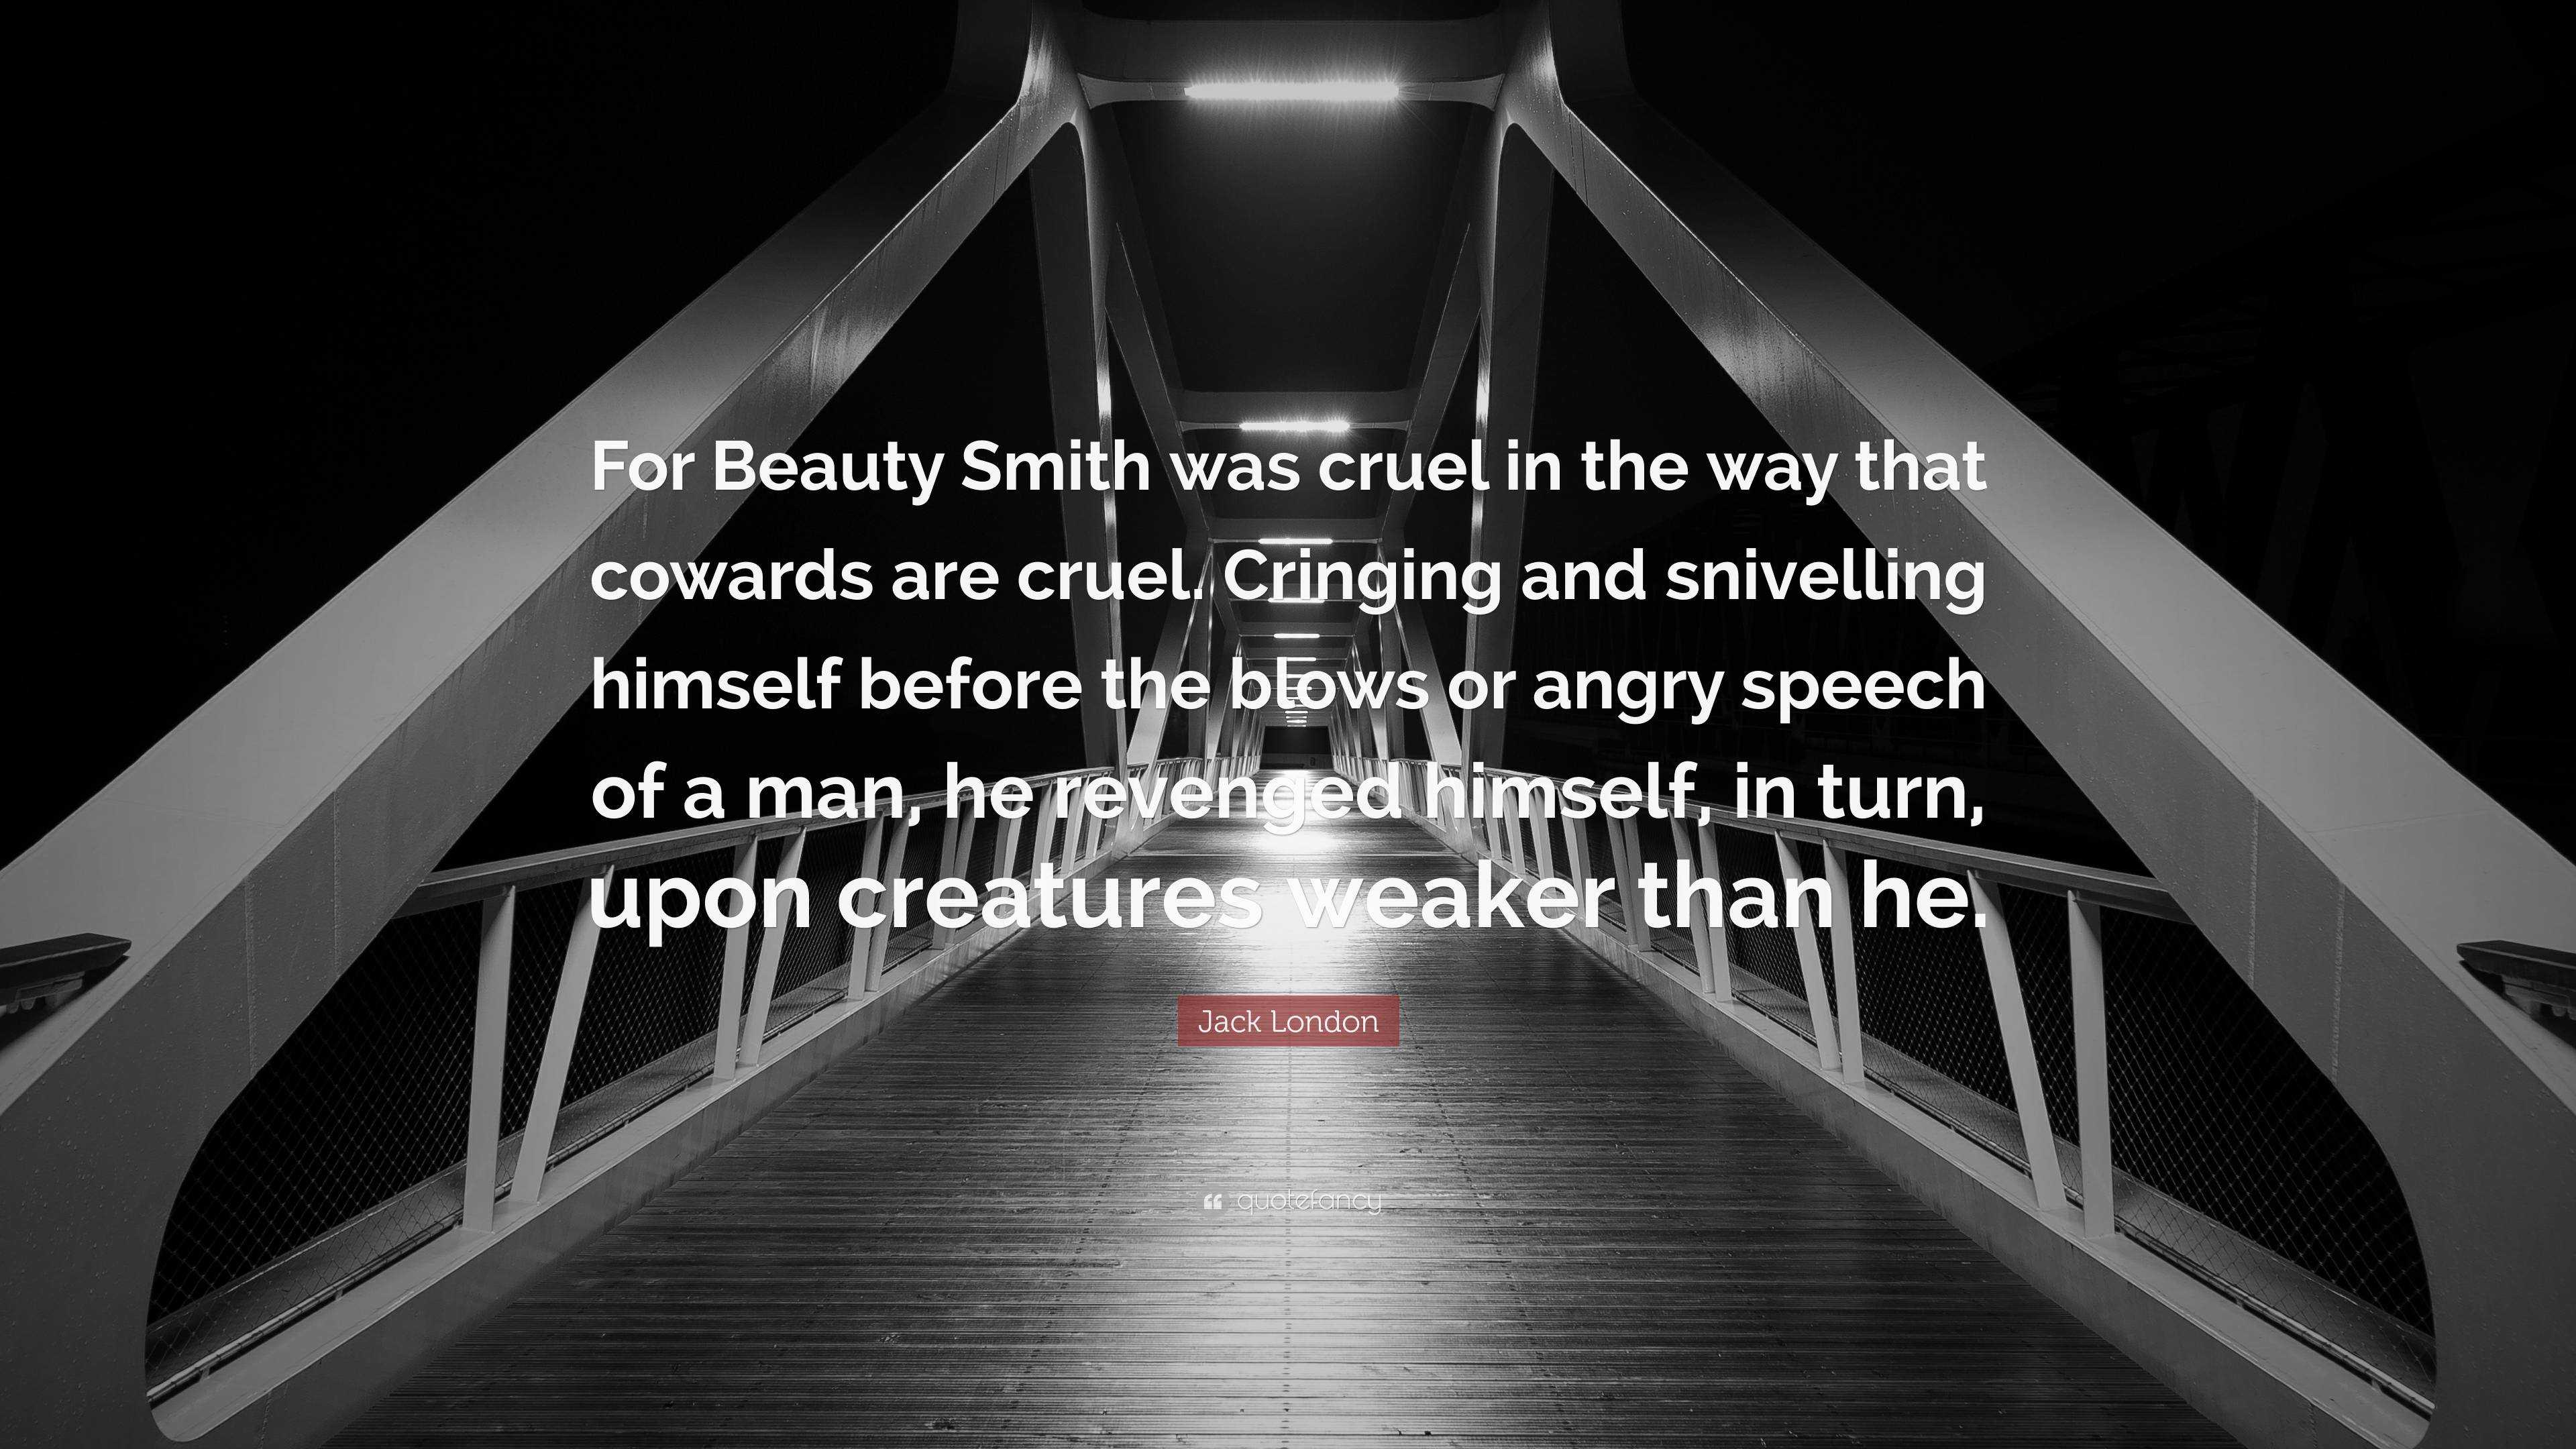 Jack London Quote: “For Beauty Smith was cruel in the way that cowards are  cruel. Cringing and snivelling himself before the blows or angry ...”